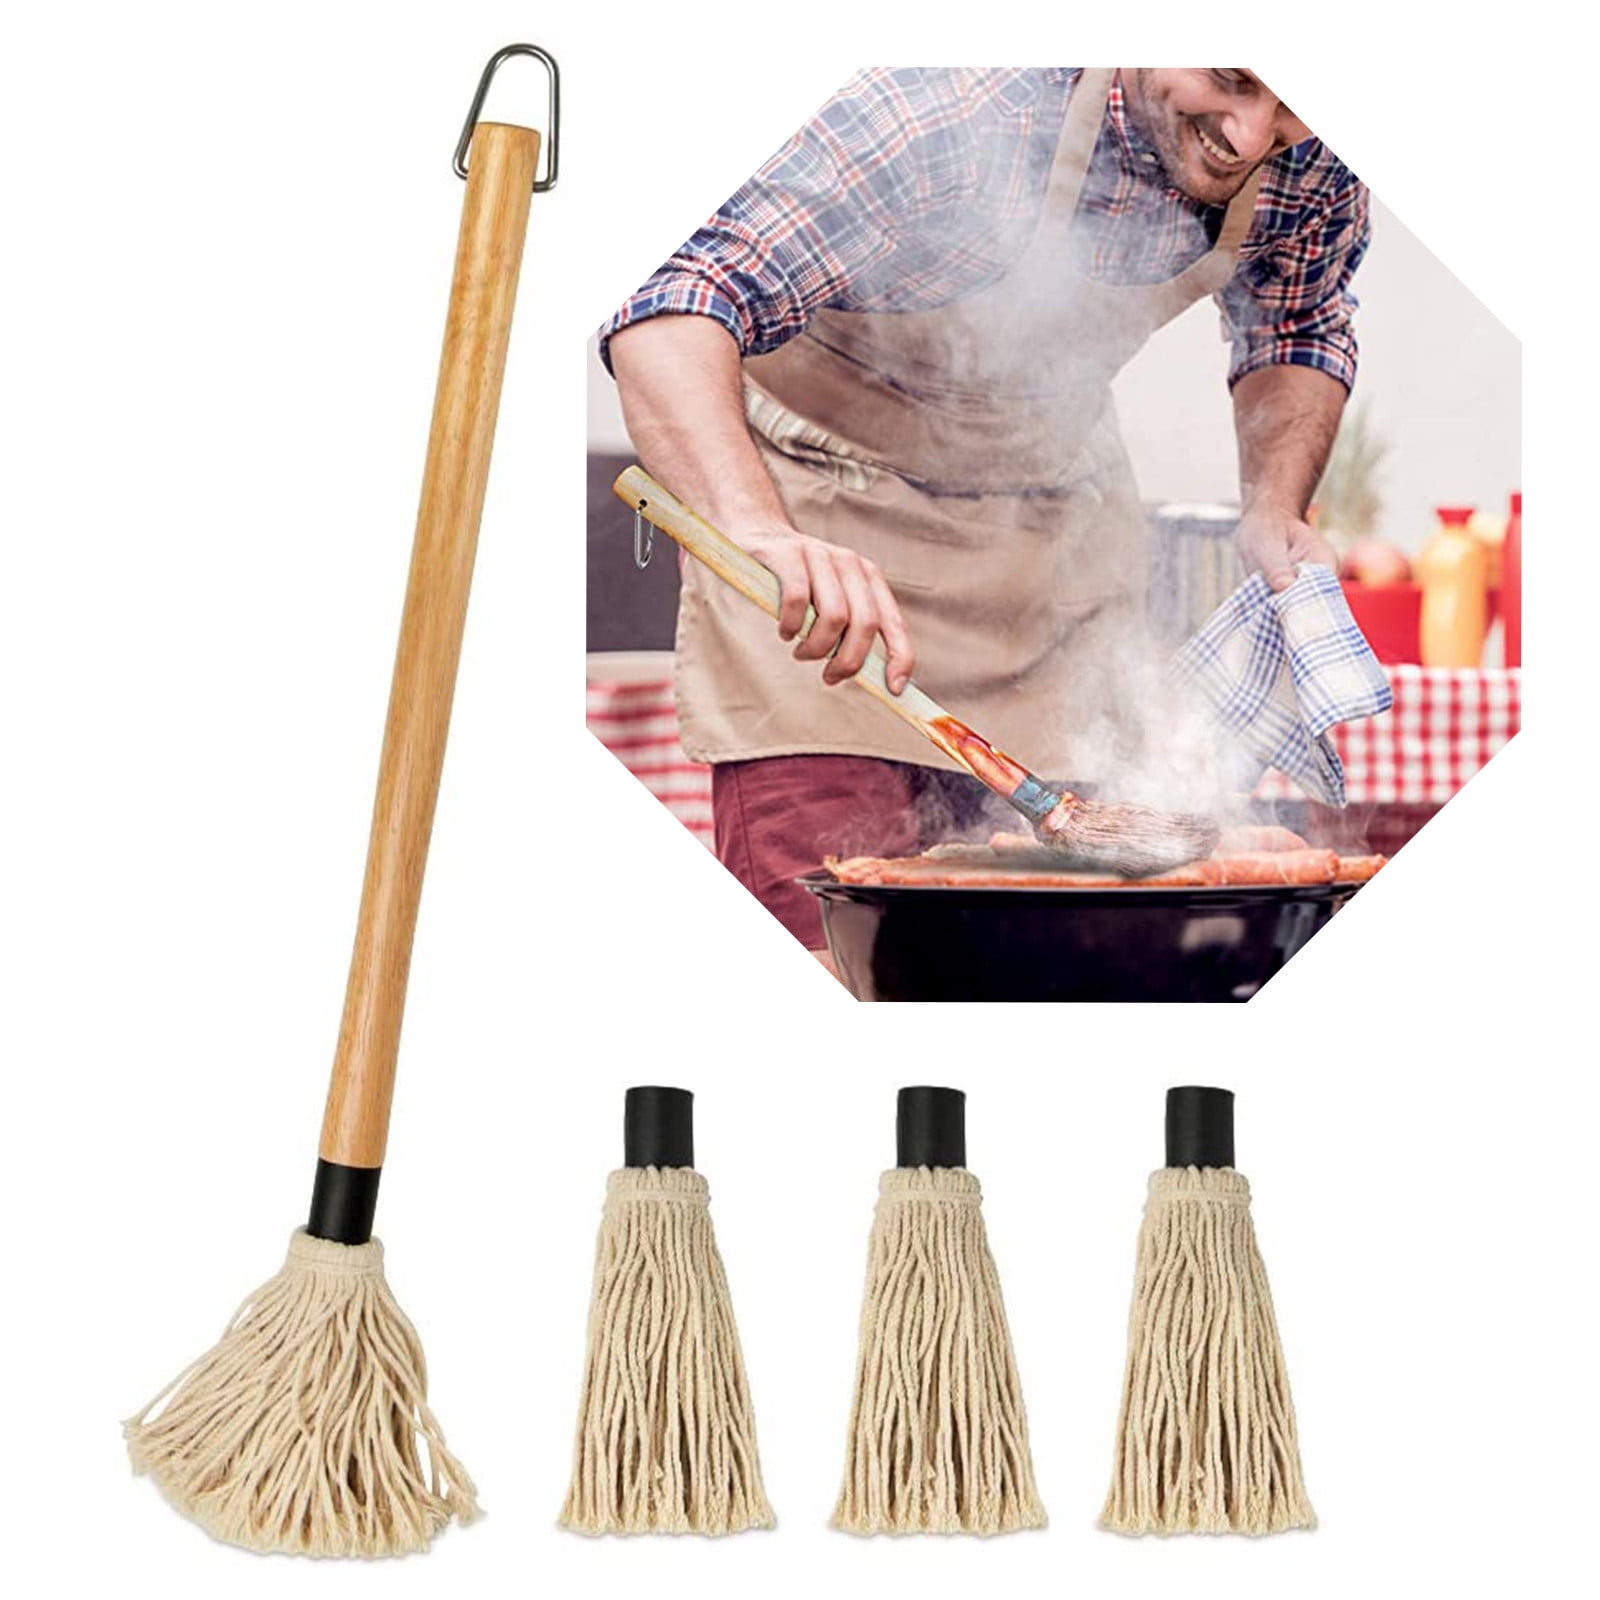 Oil Brush for Roasting Grilling Cooking NEW 18" BBQ Basting Mops w/2 Heads 